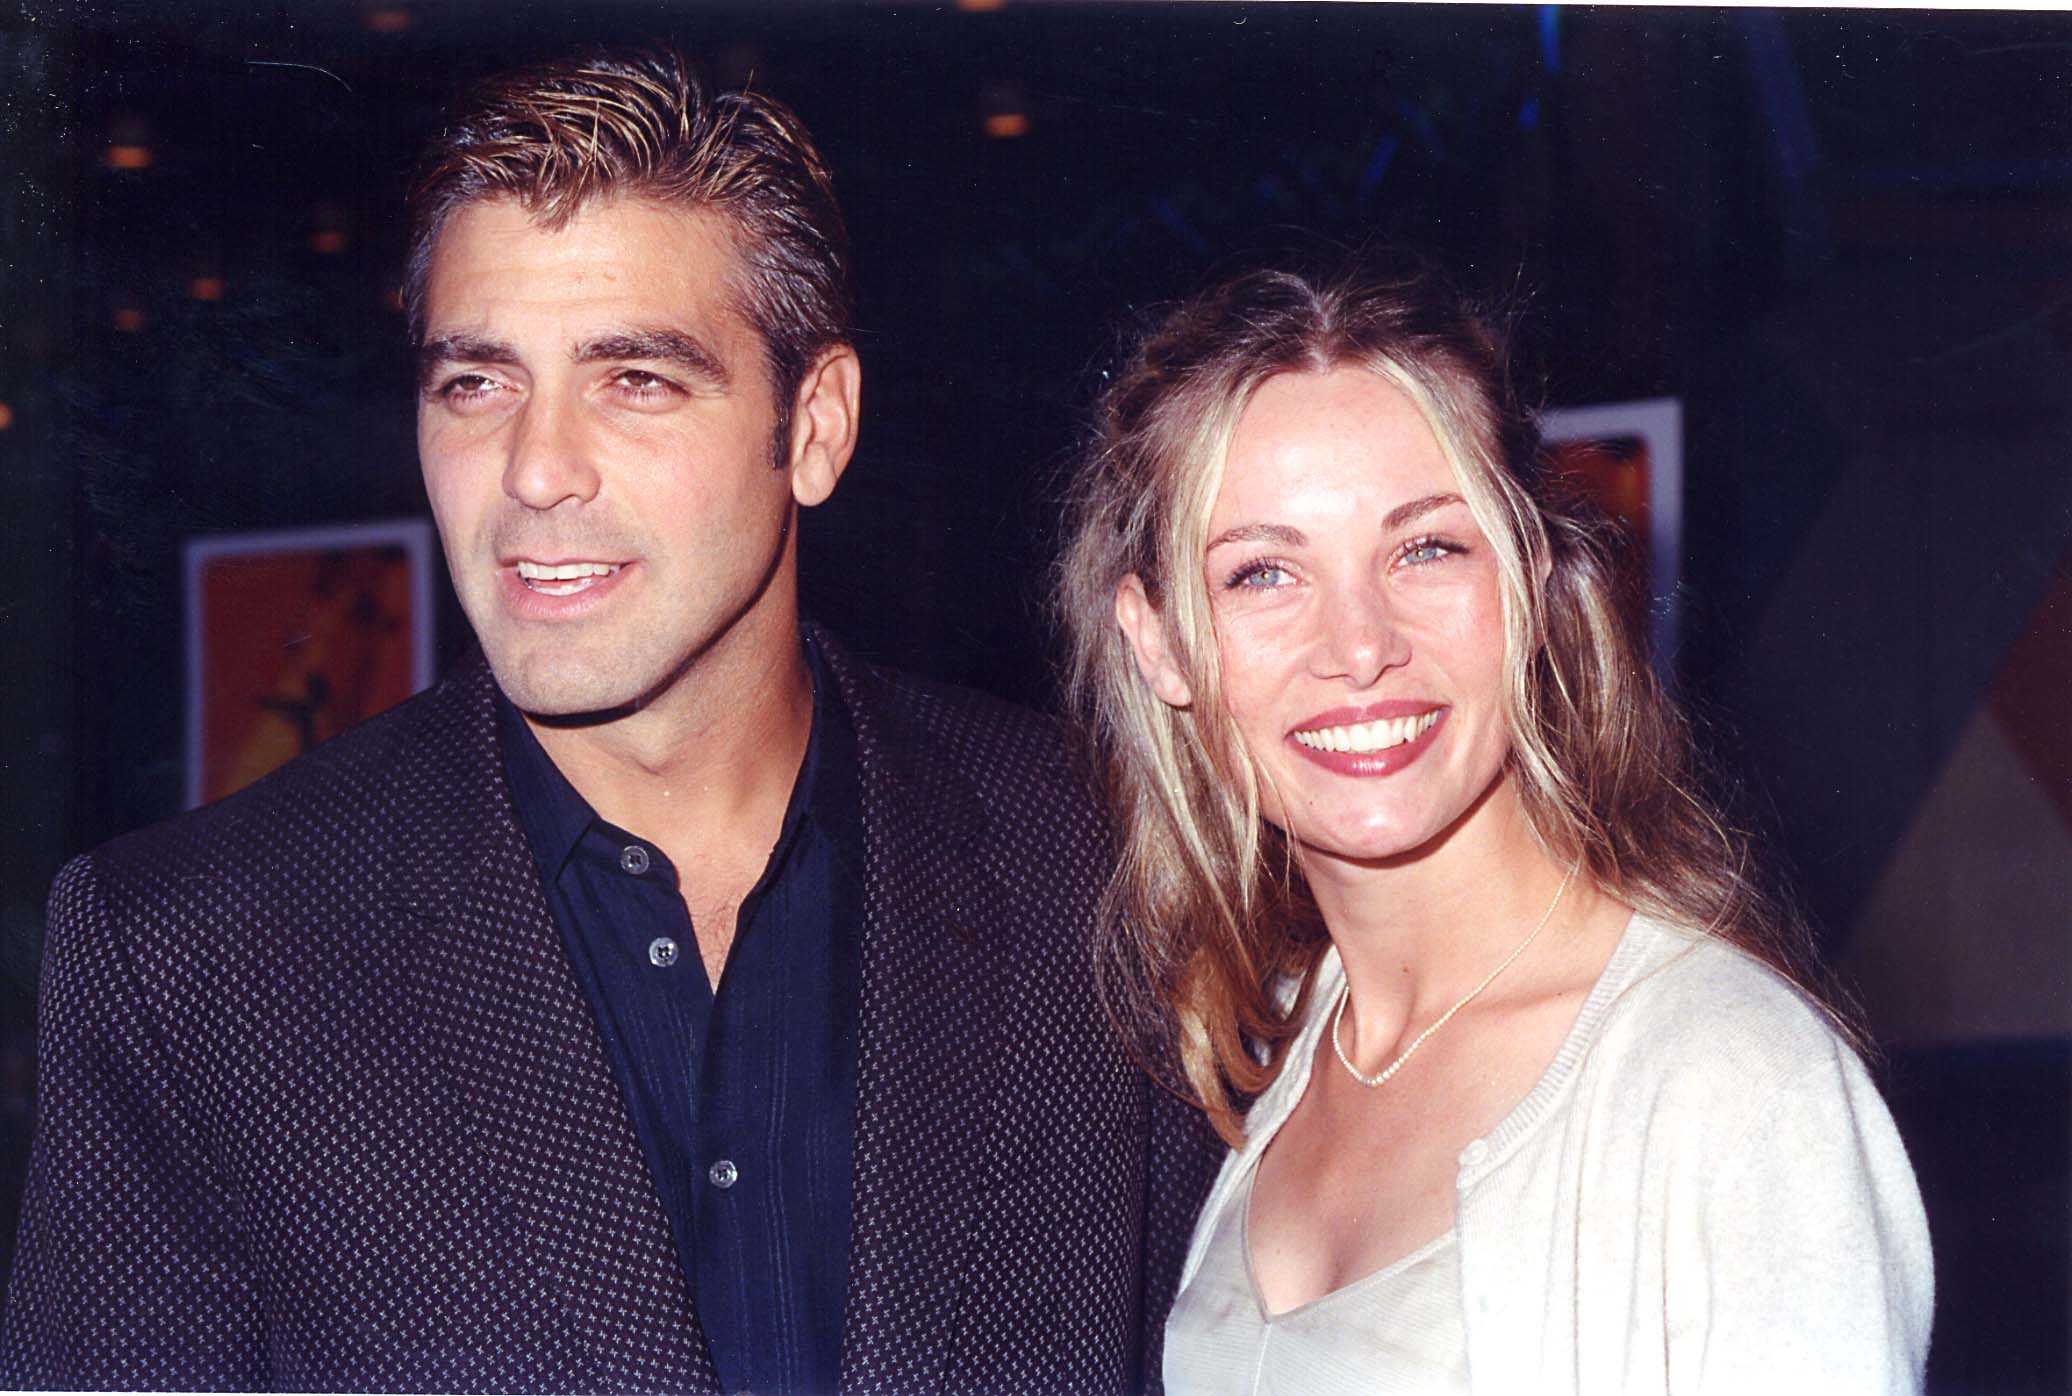 George Clooney and girlfriend Celine Balitran at the 1998 premiere of "Out of Sight" in Los Angeles. / Source: Getty Images